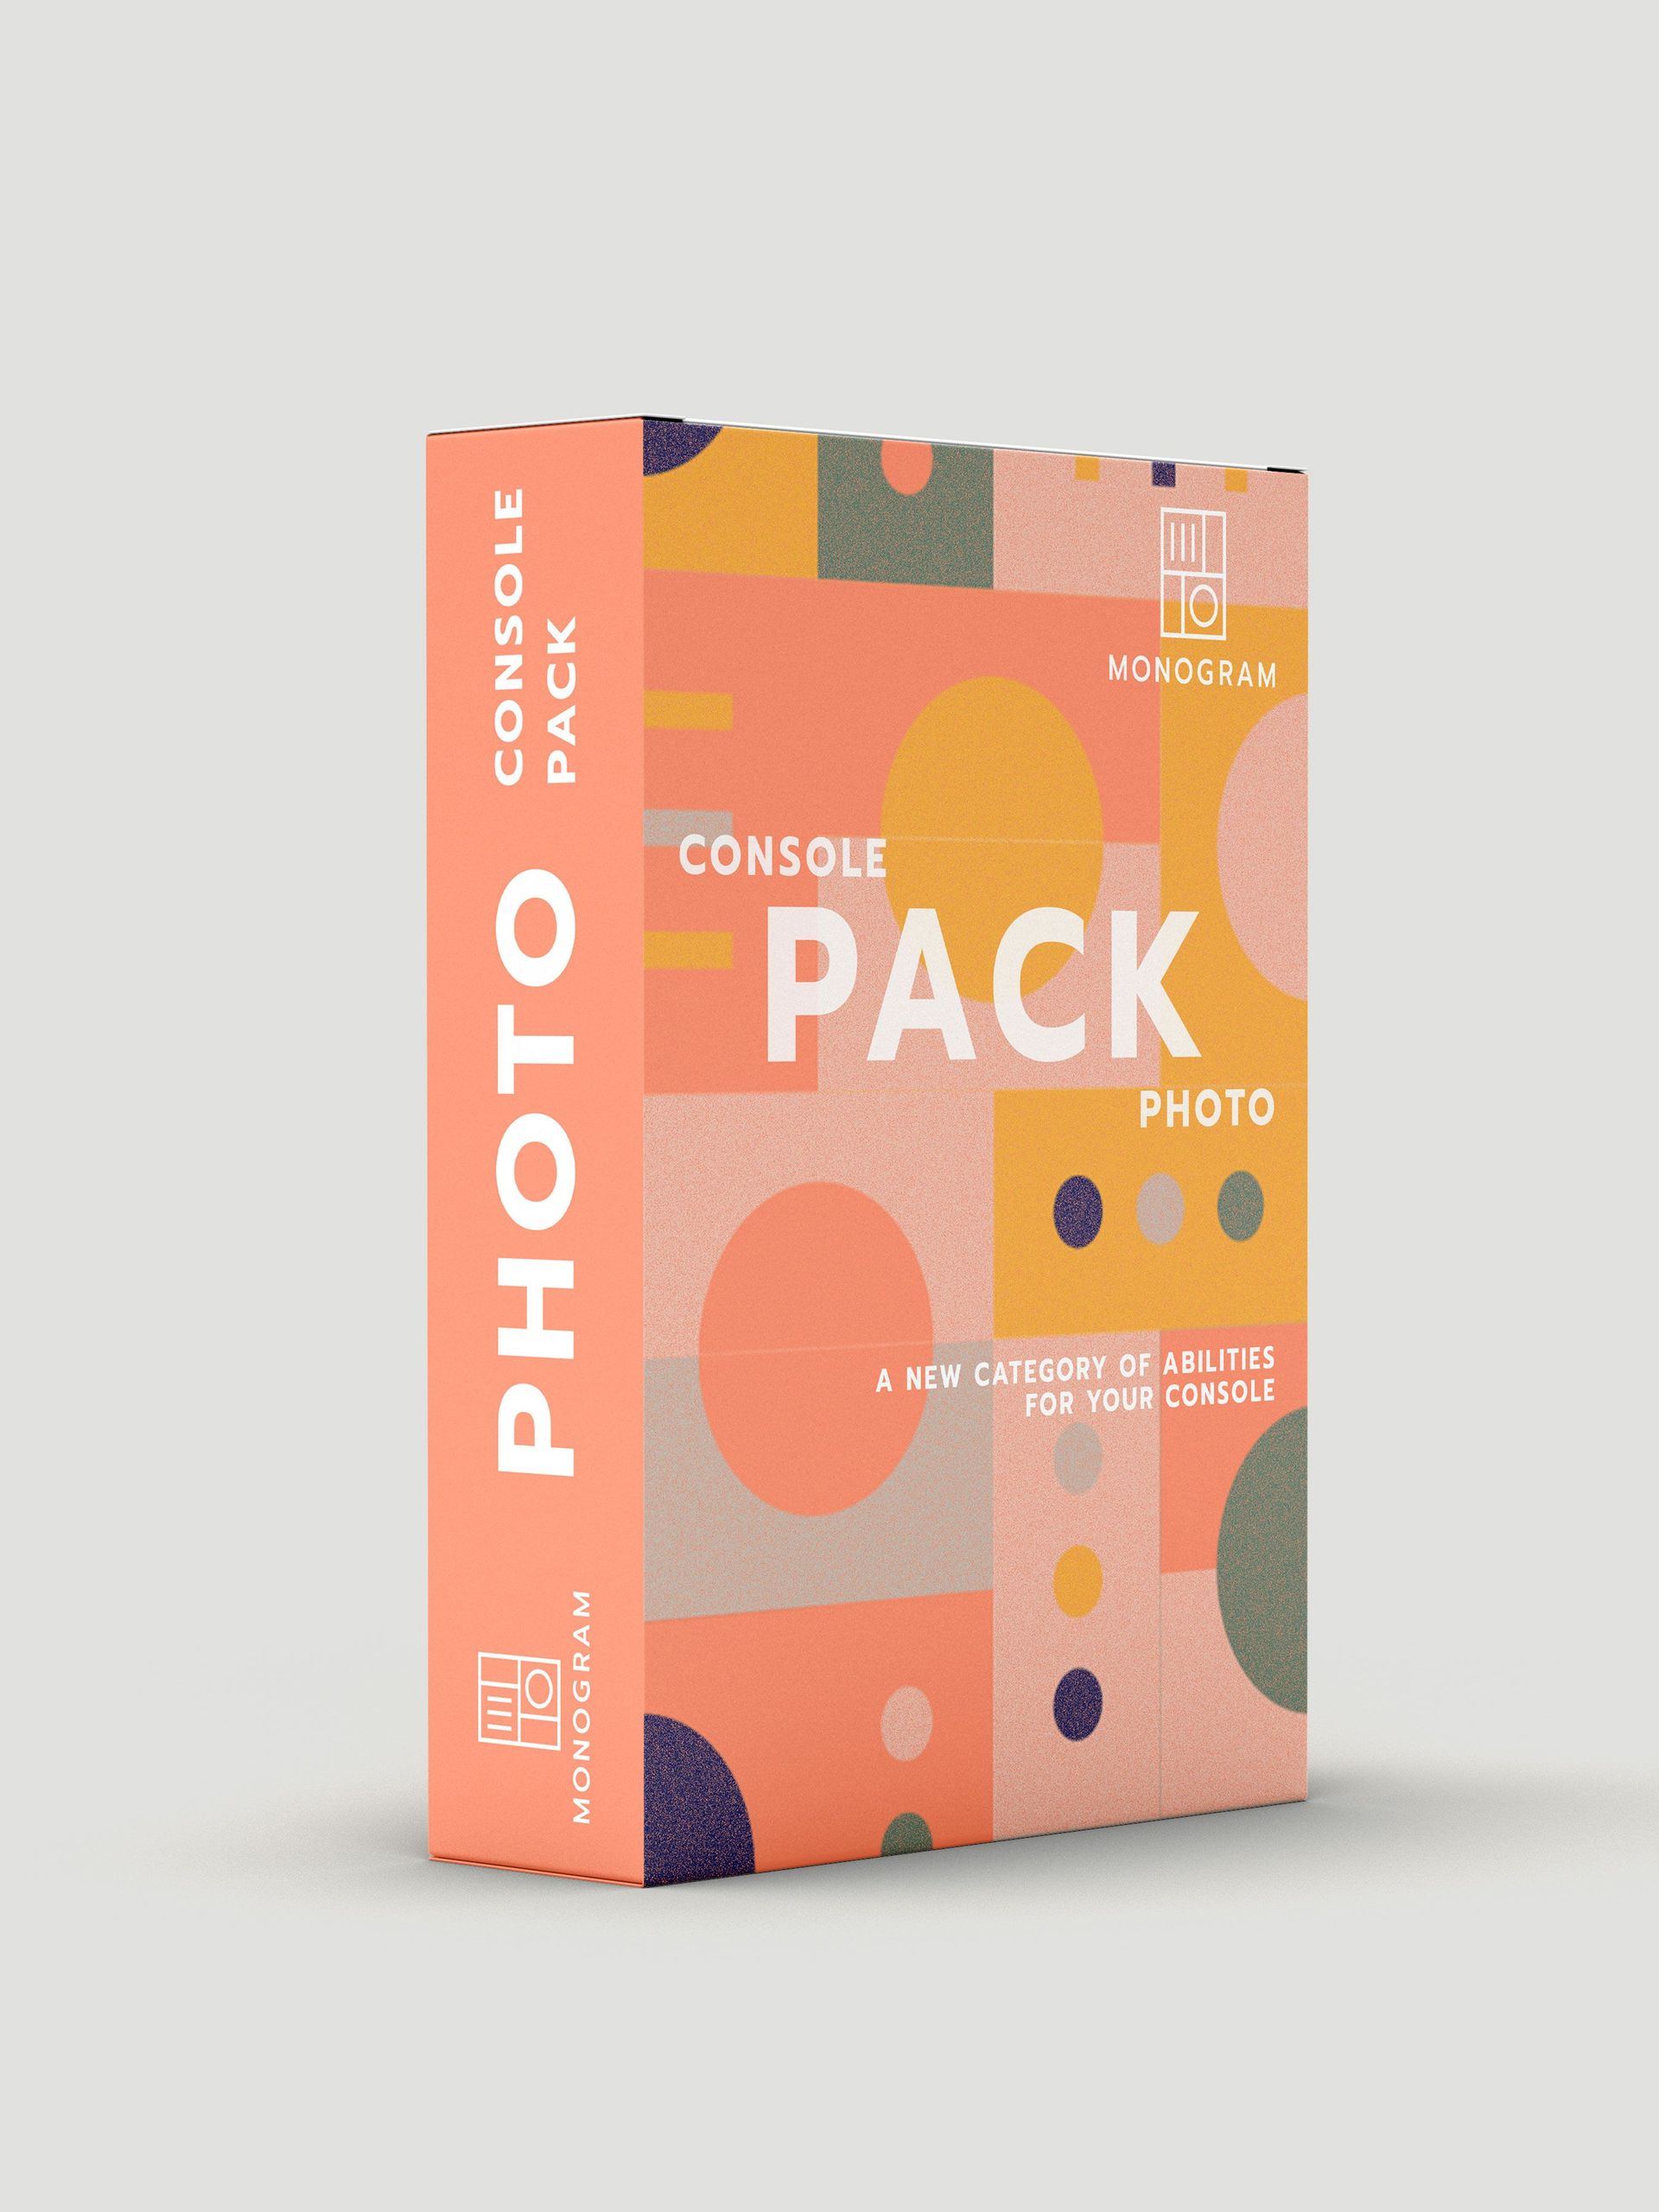 Photo Pack is included with Photo Console